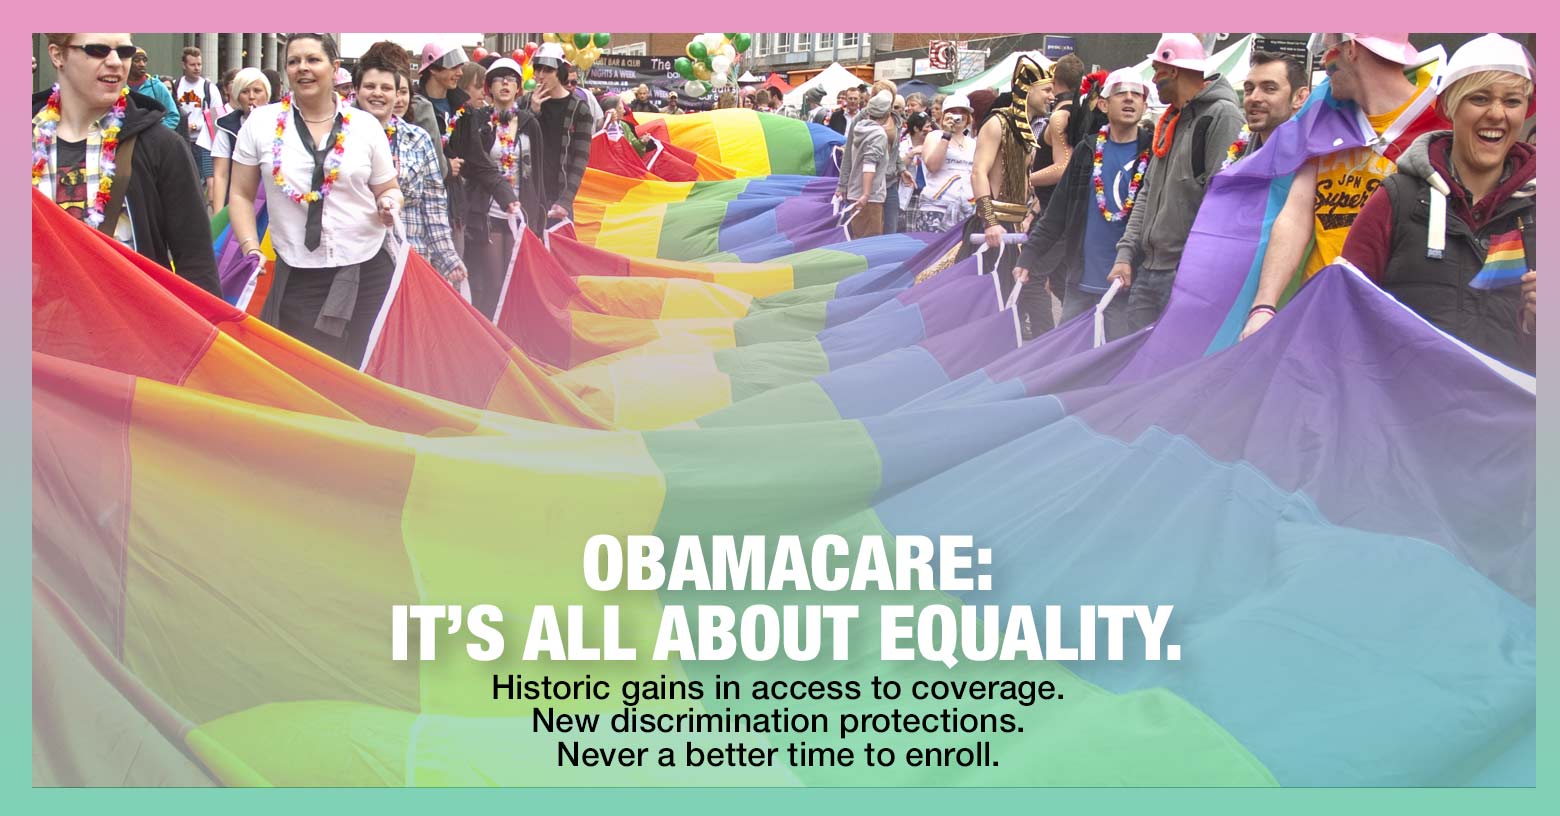 The ACA brings LGBT equality.